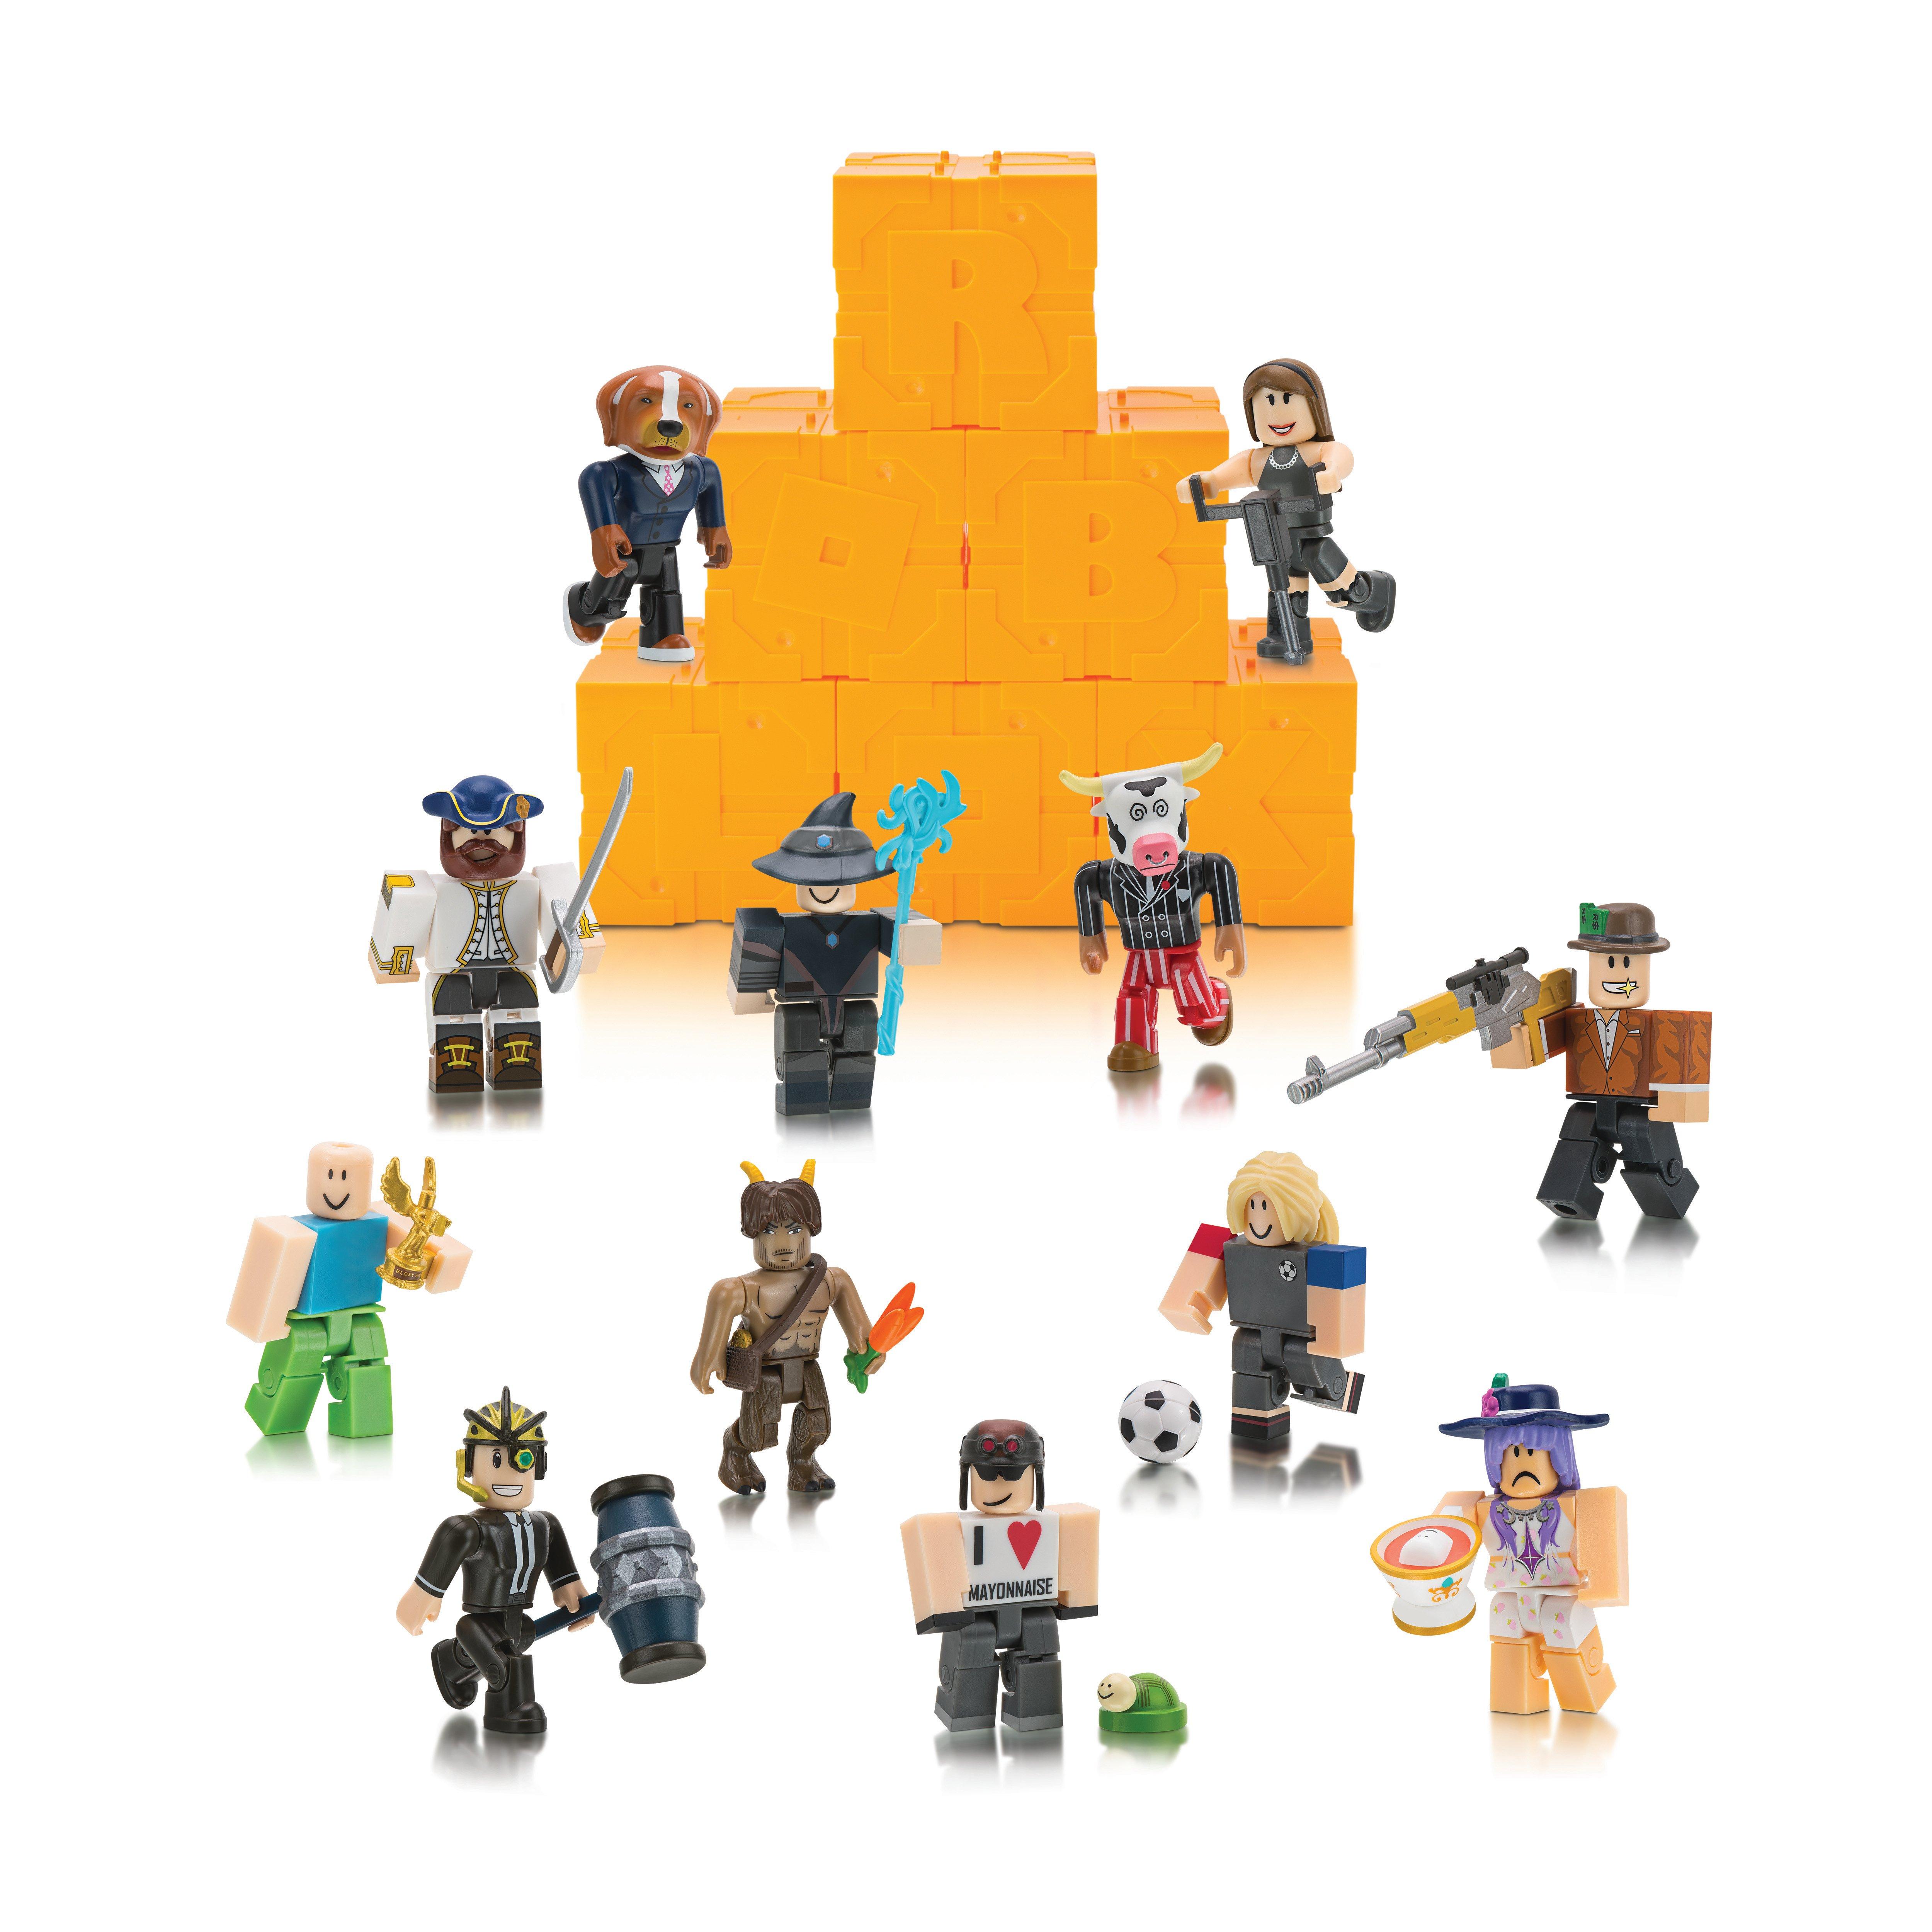 Roblox Toys With Codes